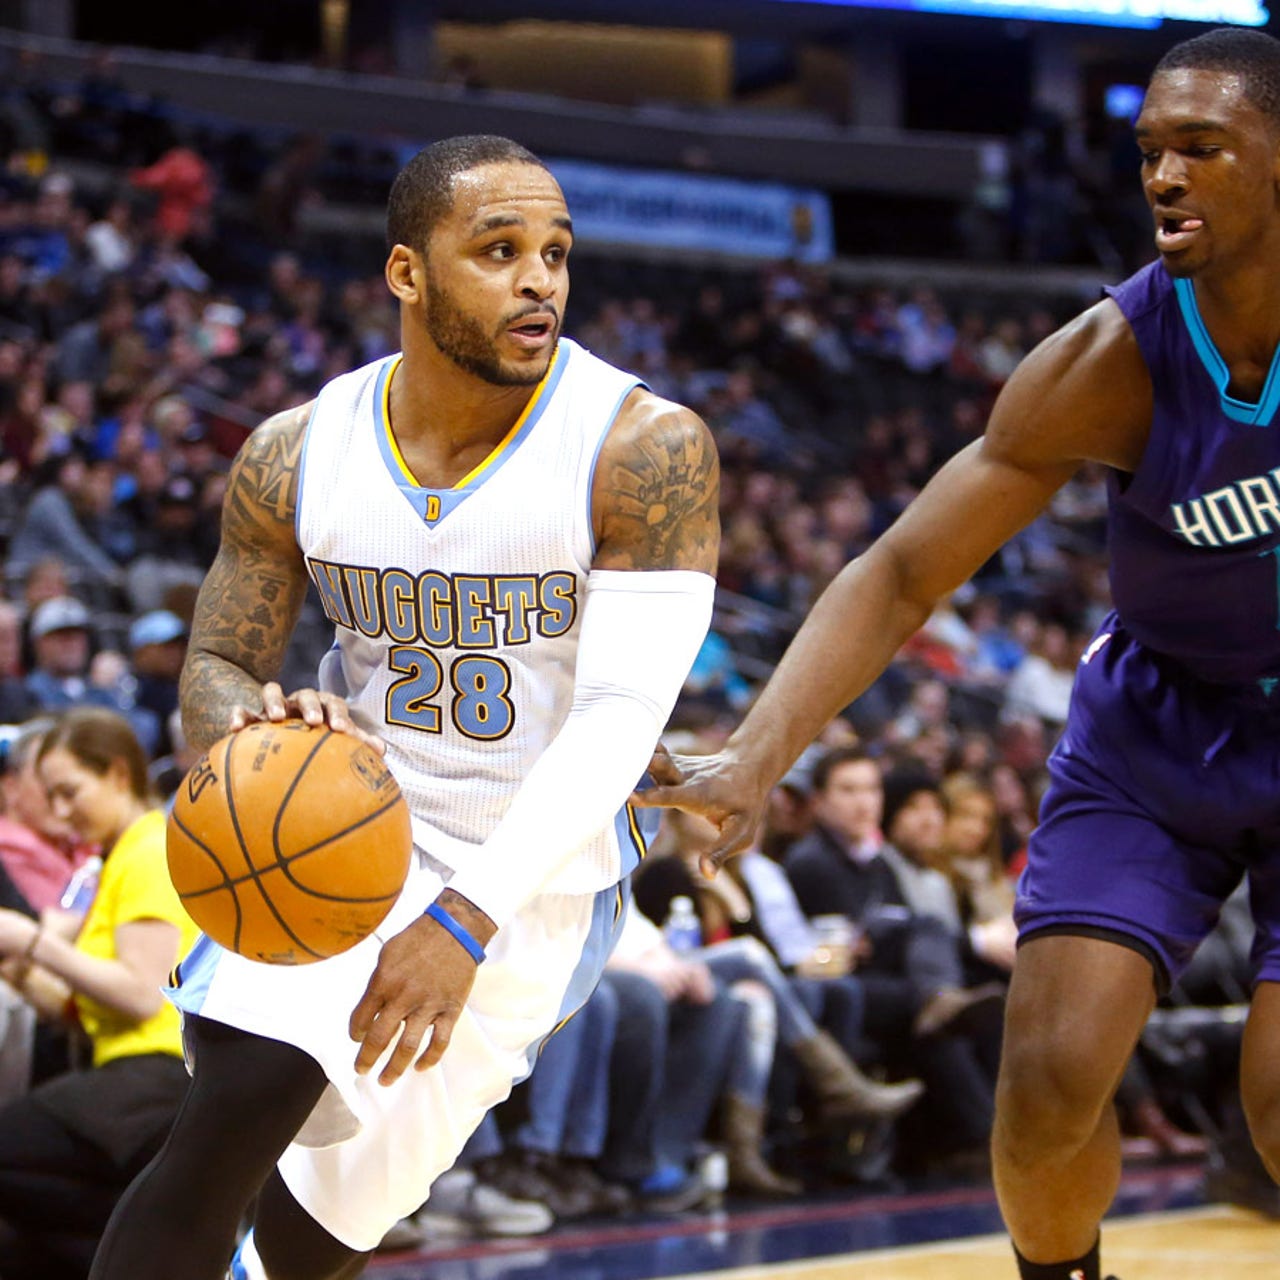 Jameer Nelson to opt out